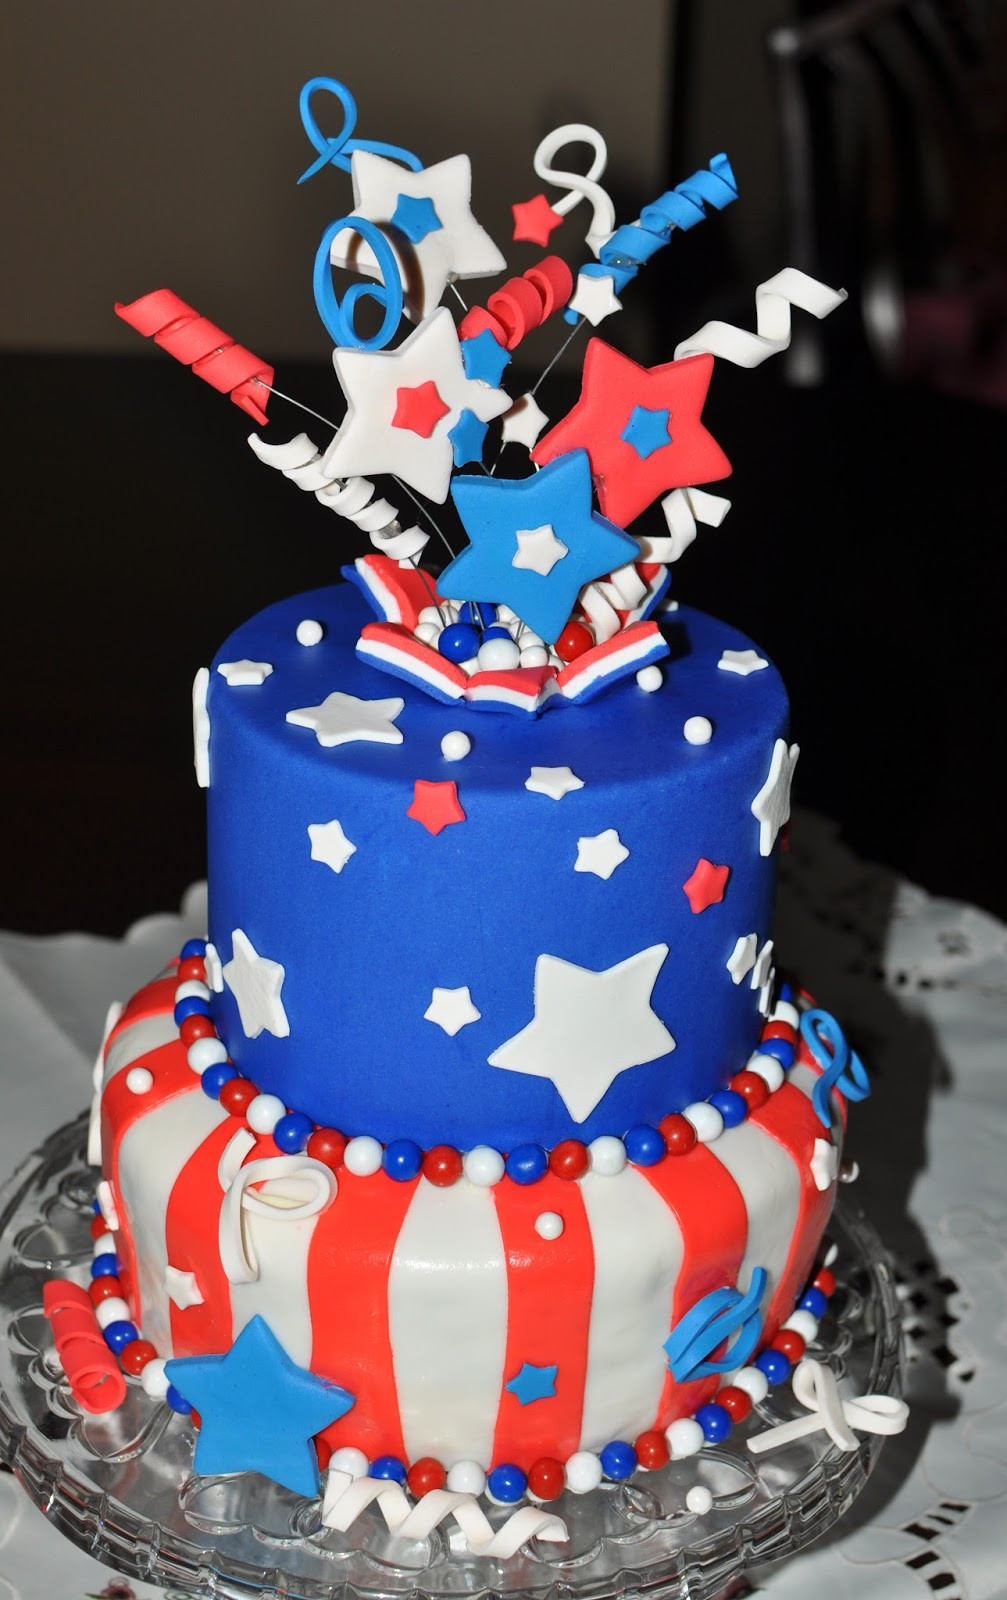 4Th Of July Birthday Cake
 The Bake More 4th of July Explosion Cake